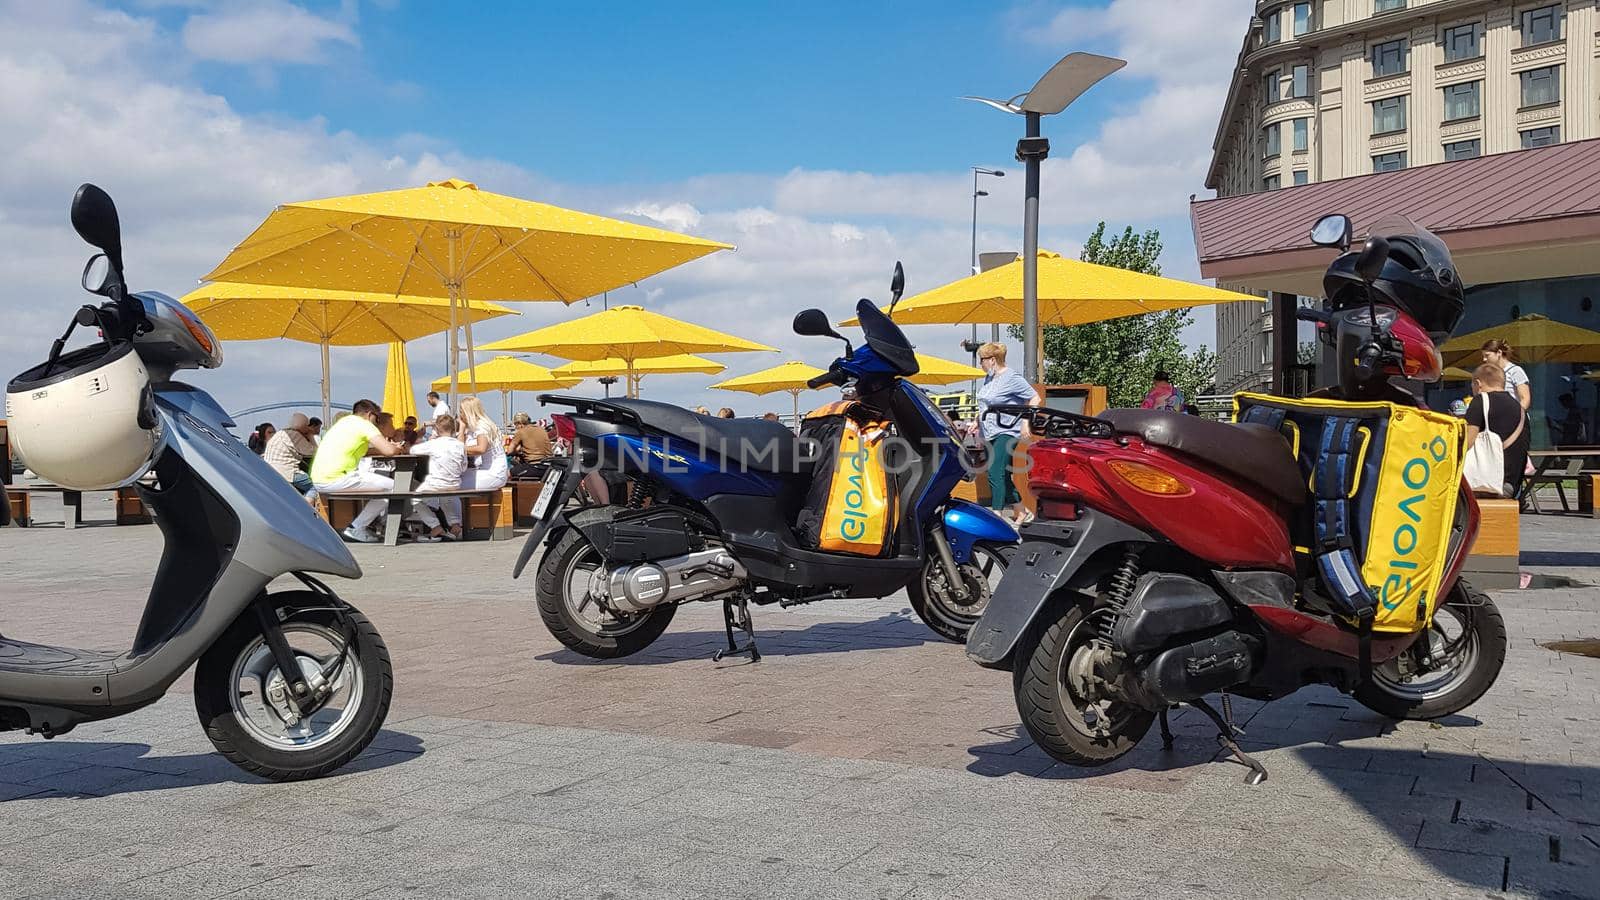 Ukraine, Kiev - August 29, 2020. Lot of parked mopeds with yellow bags with Glovo logo near McDonald's. Courier service that delivers goods ordered through a mobile application. Editorial photography